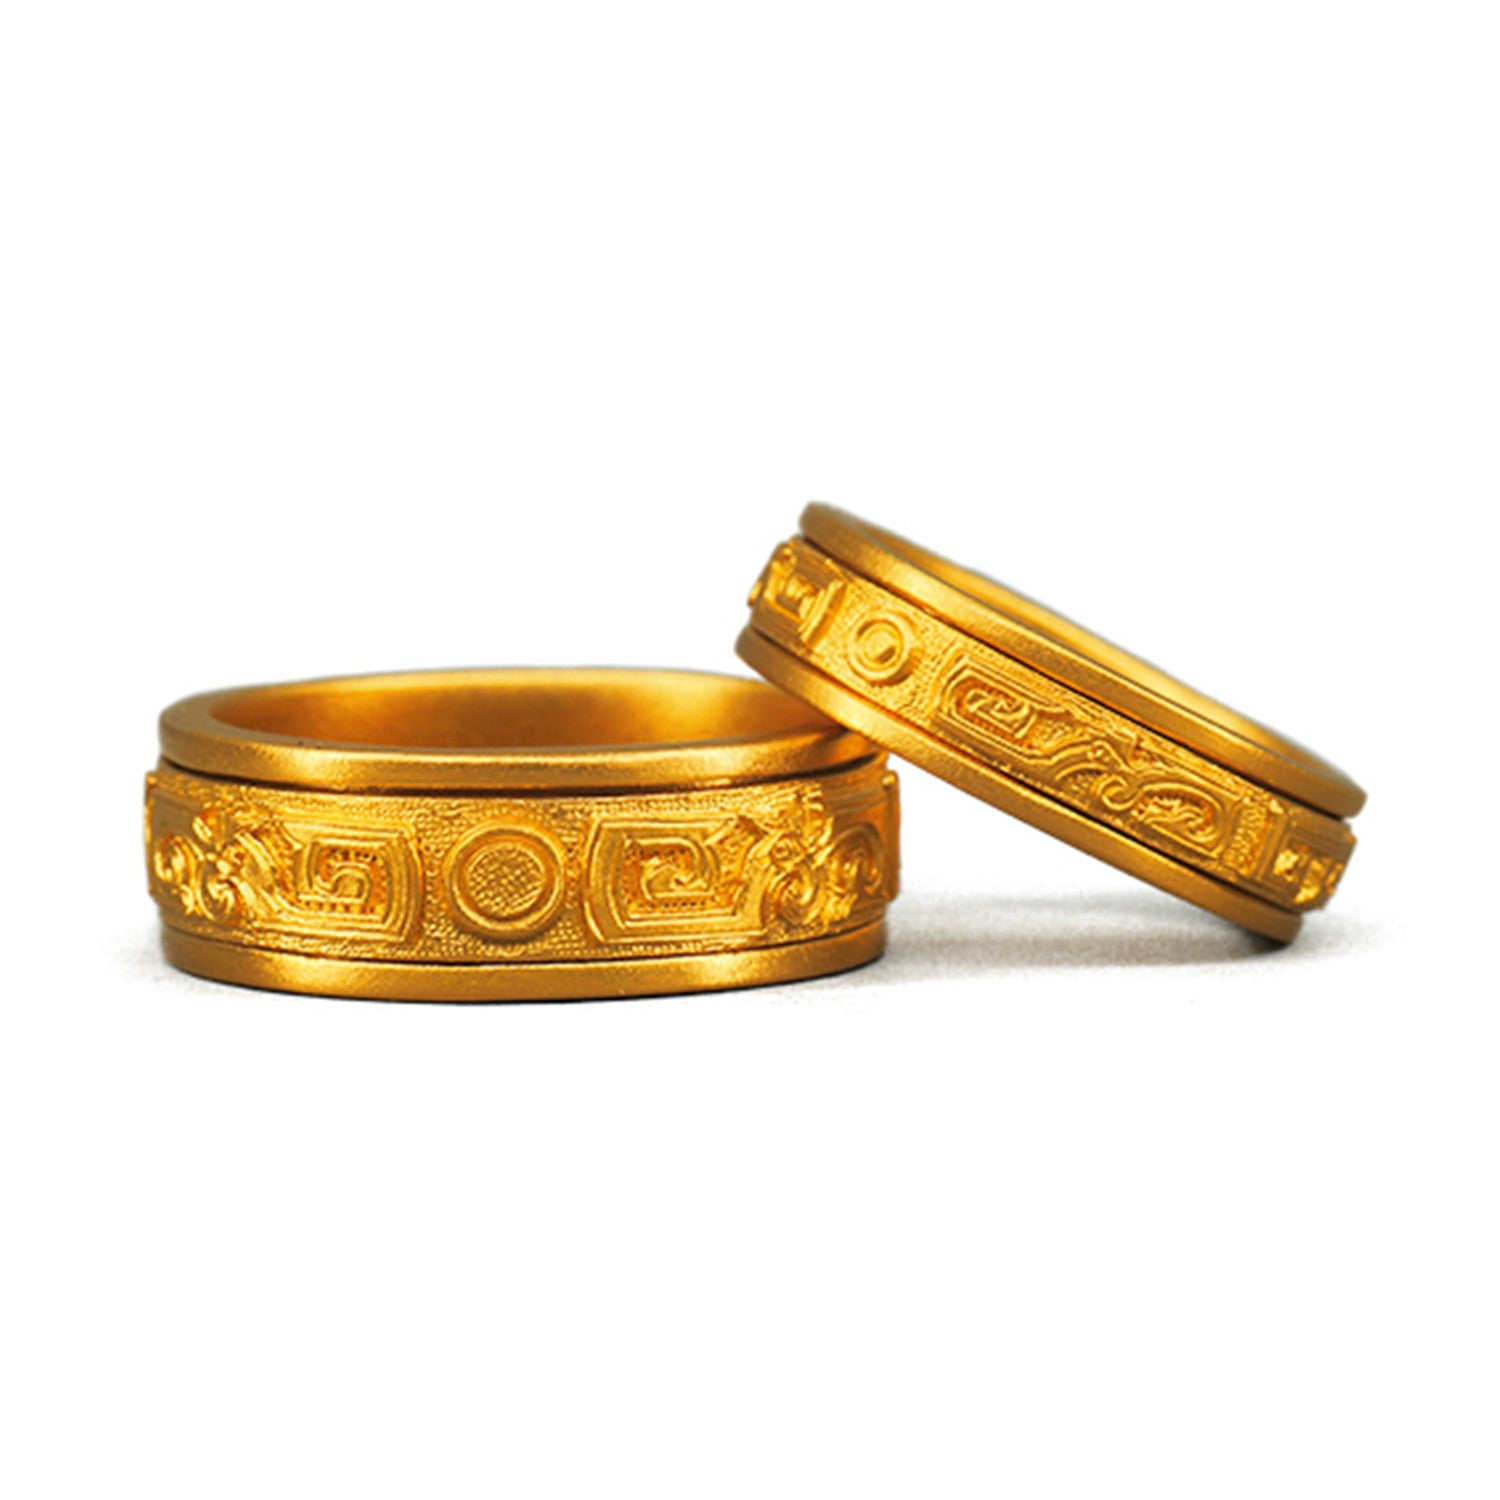 EVECOCO Full Gold Ring Hand Forging With Sculpted Reliefs,8mm Wide